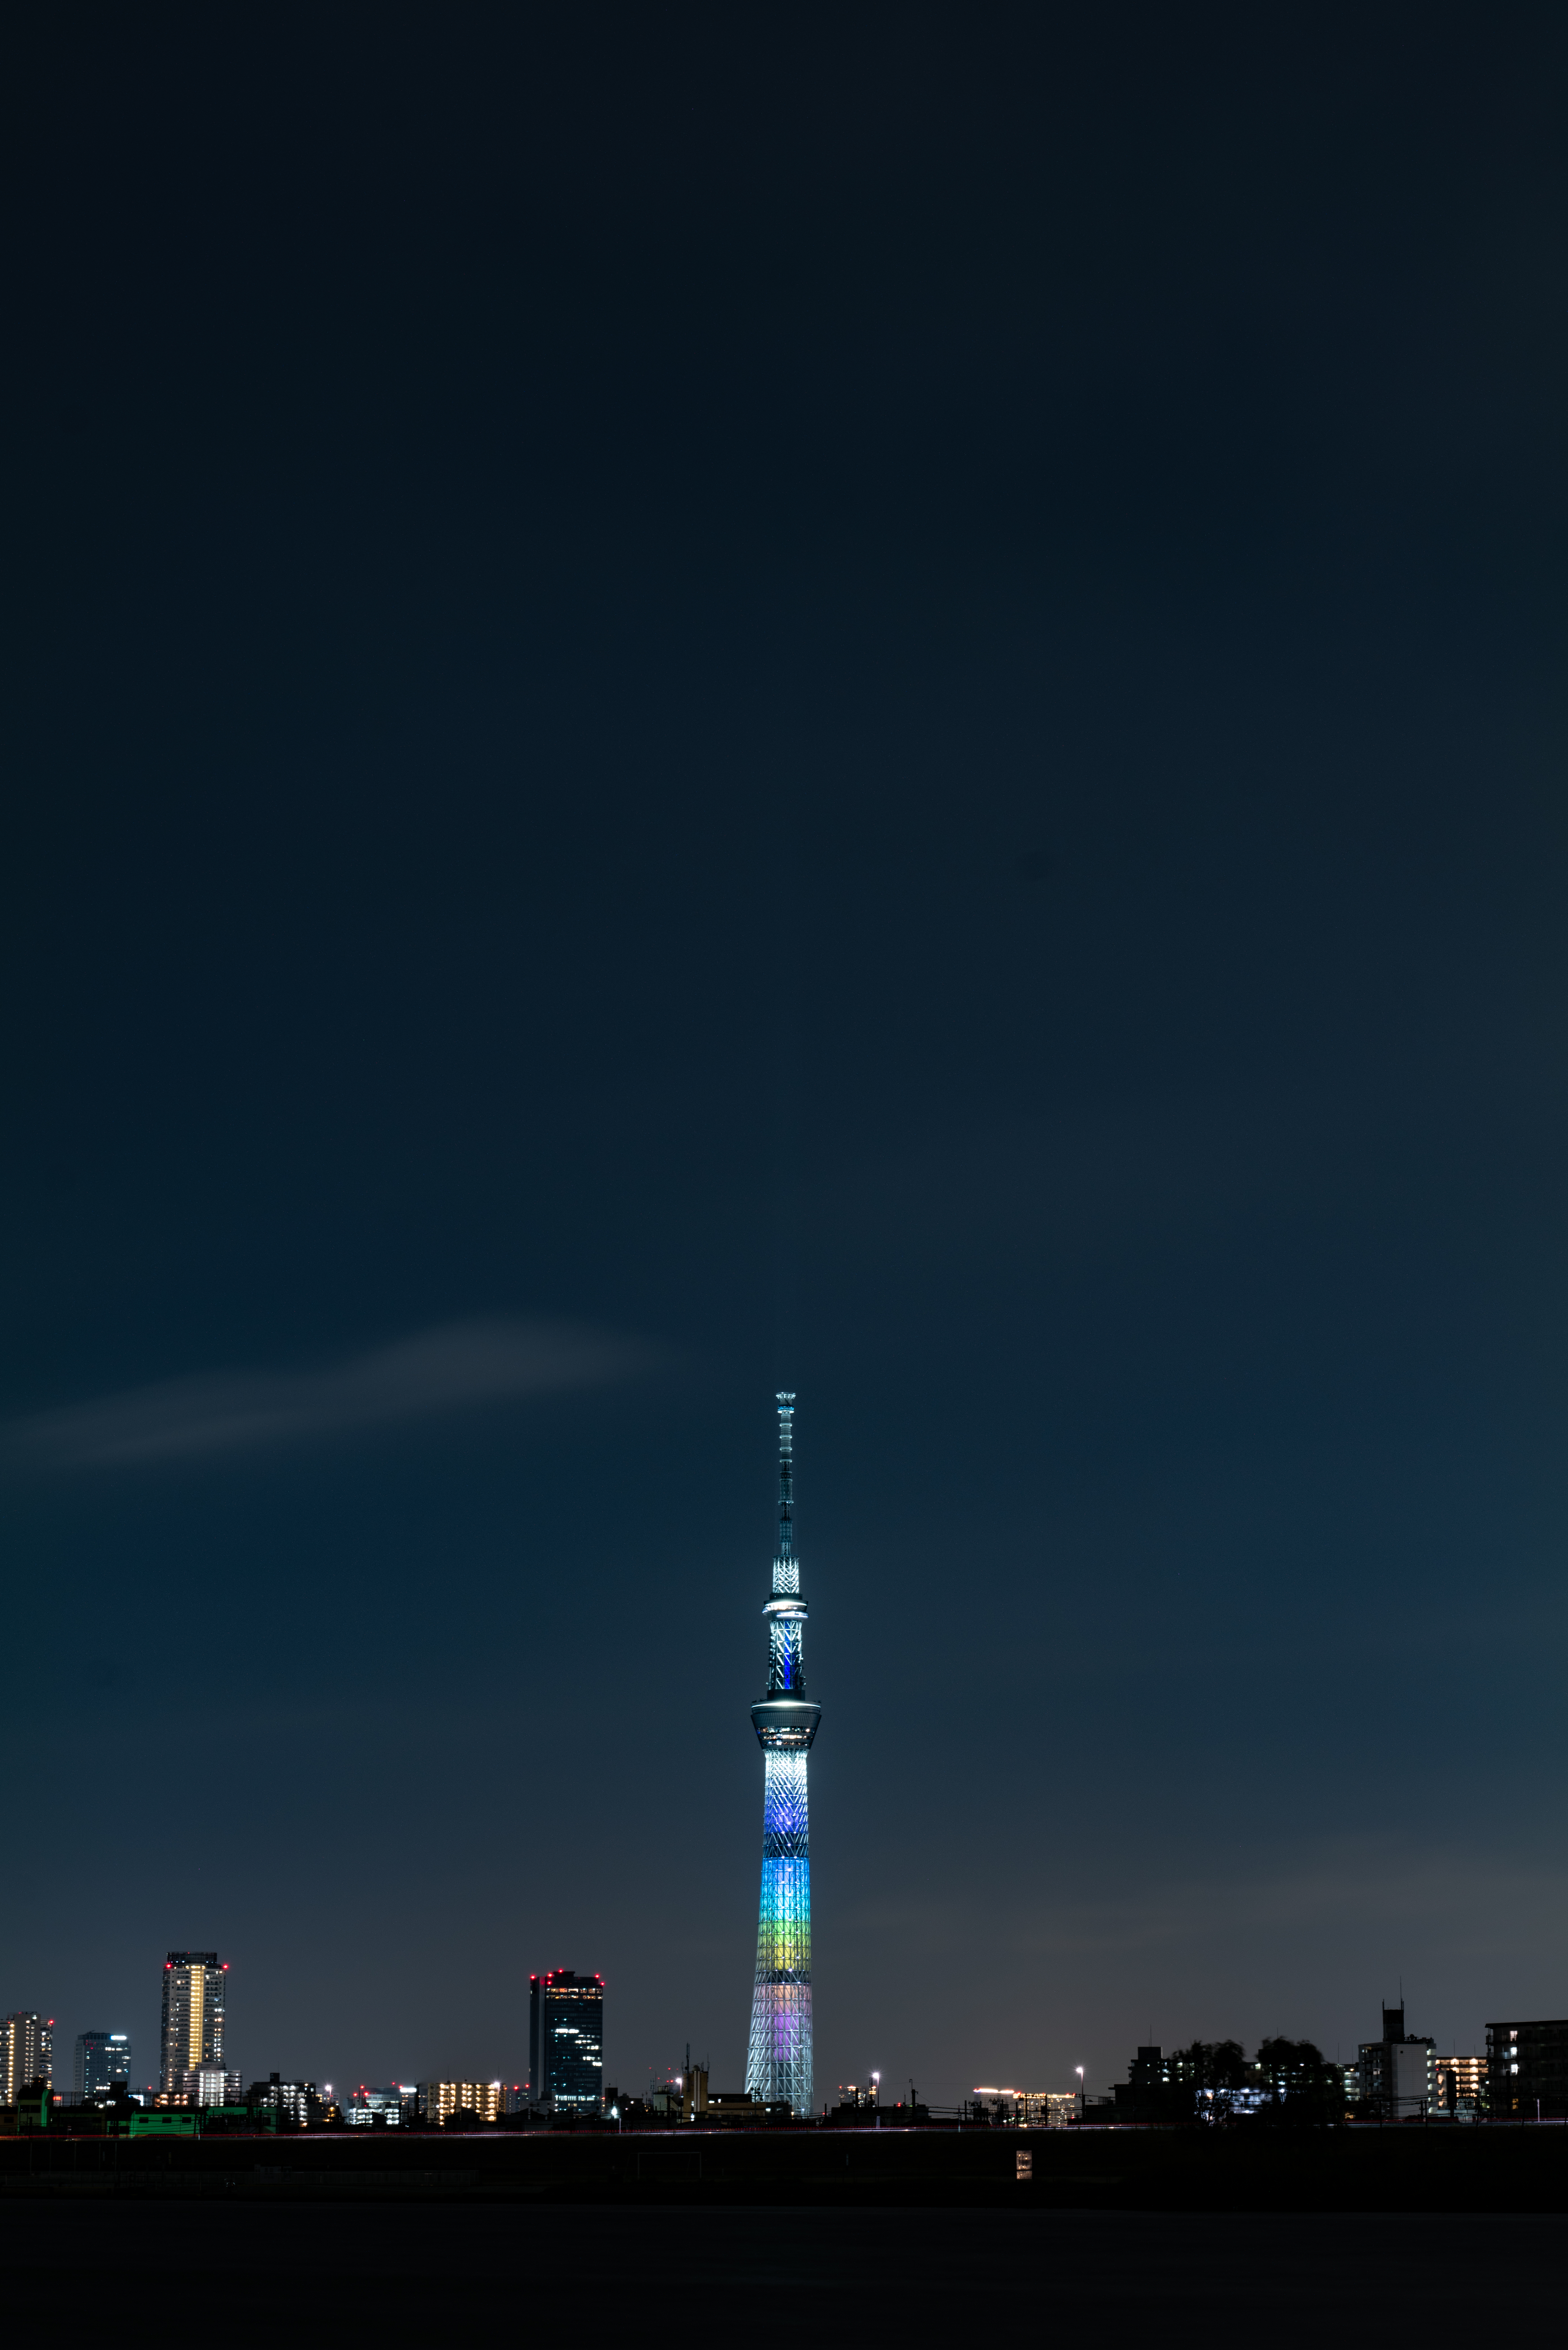 android night, tower, cities, building, illumination, backlight, city, architecture